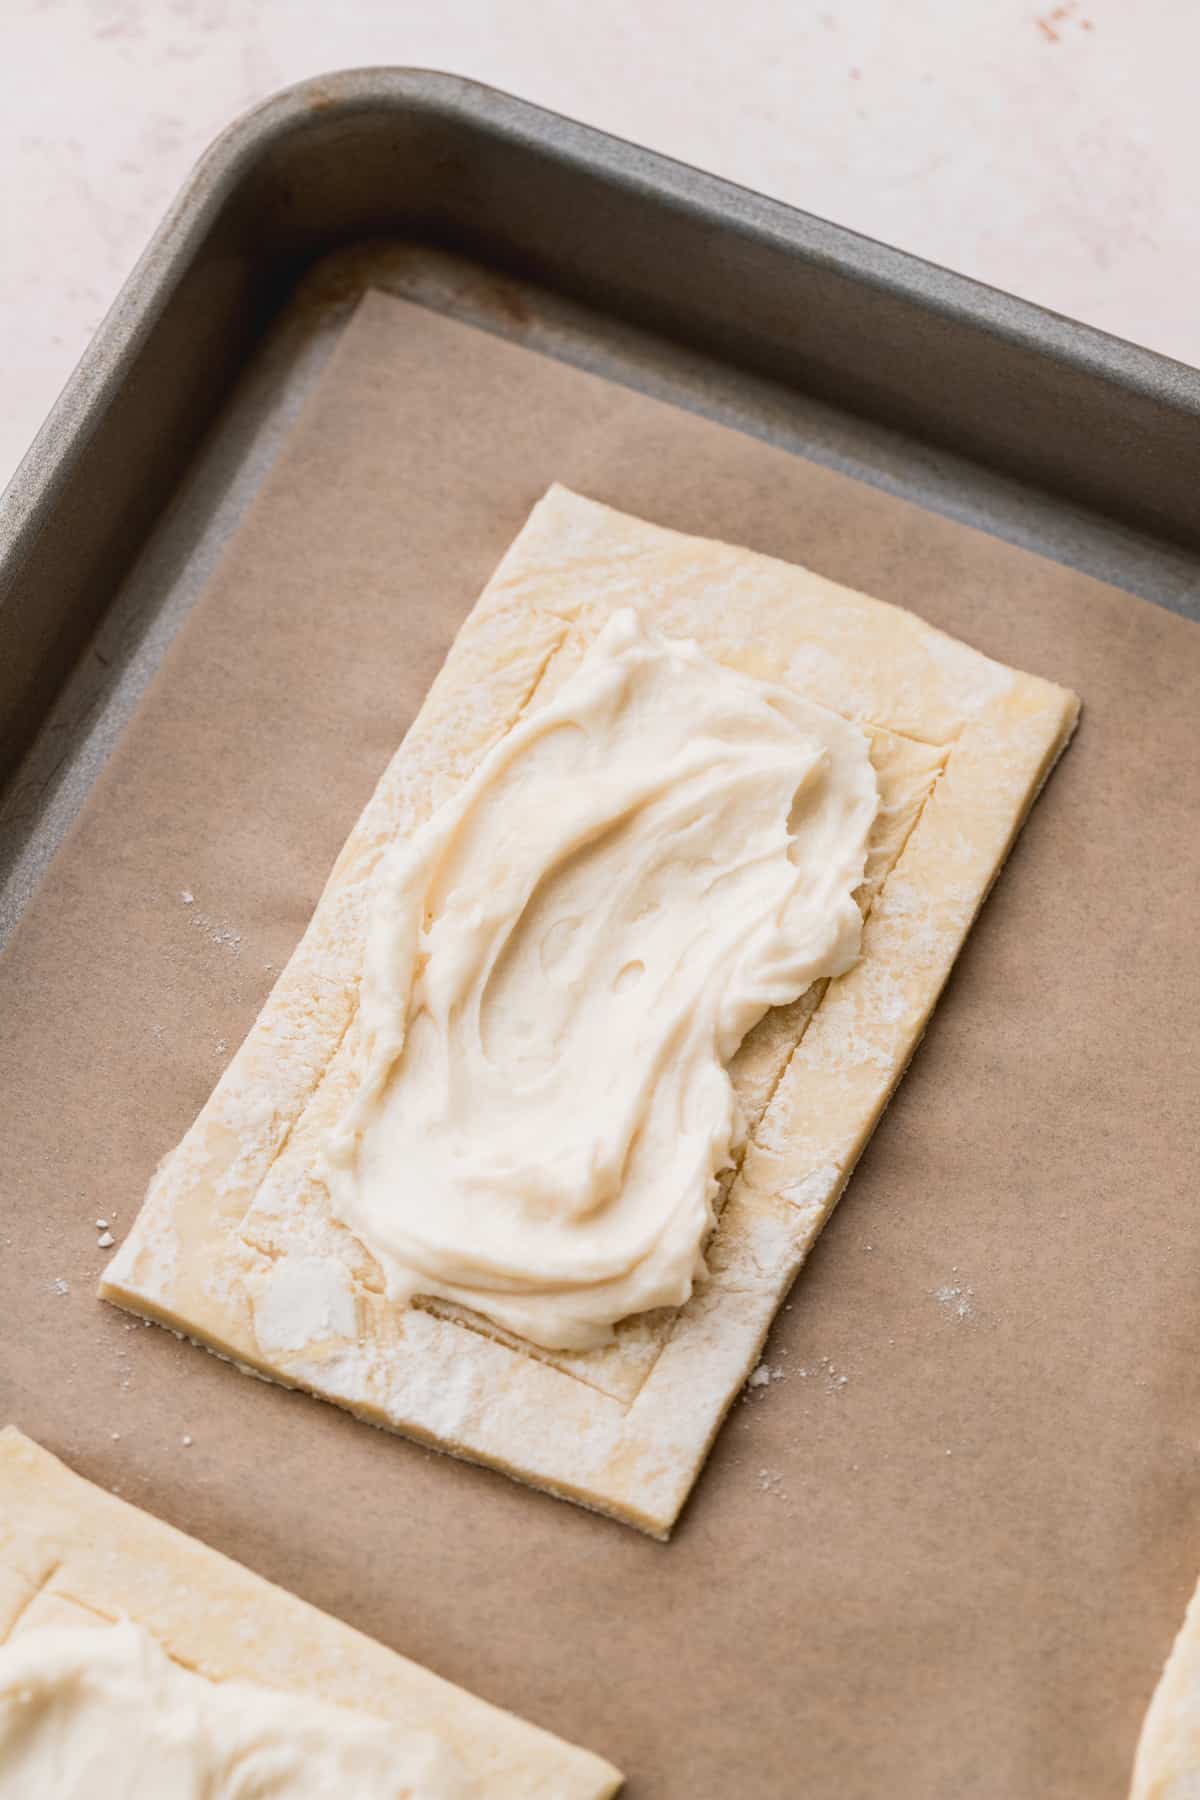 Cream cheese filling on top of one pastry rectangle.